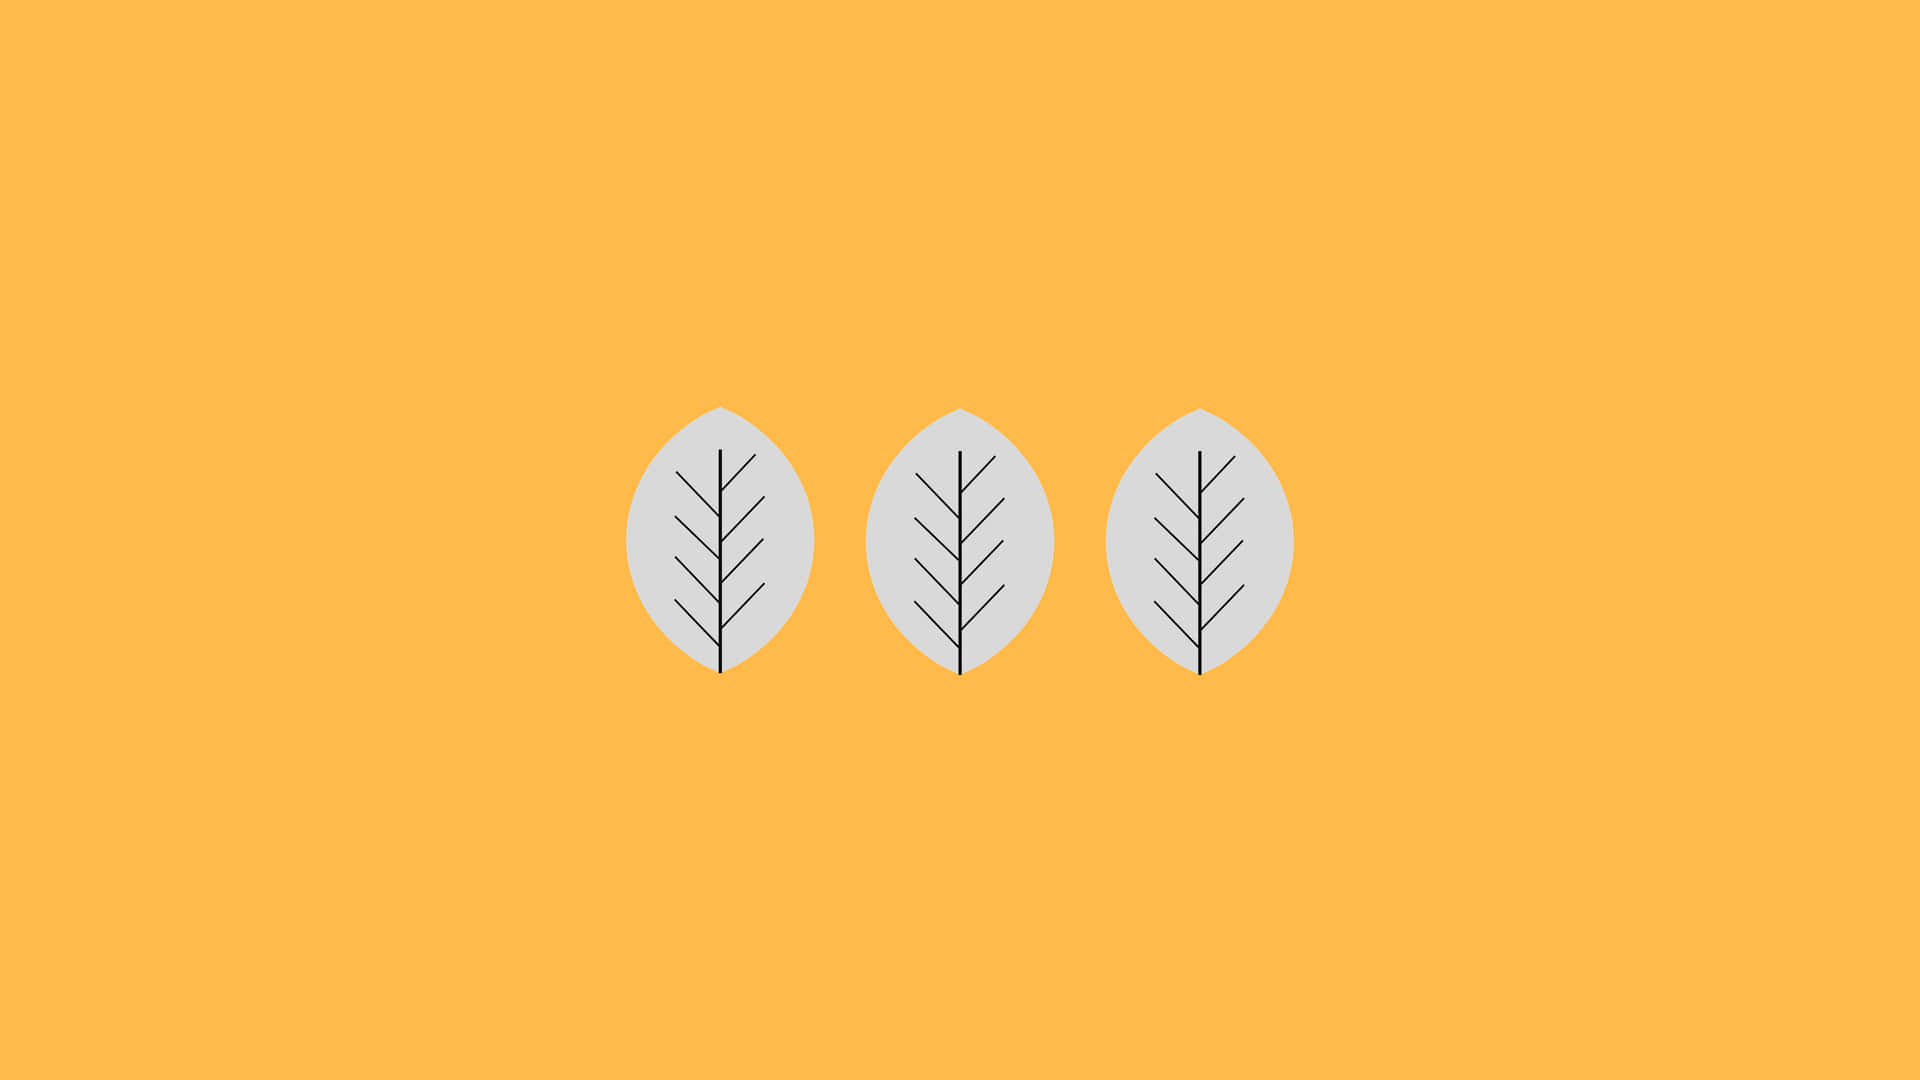 A minimalist take on the traditional autumnal scene Wallpaper